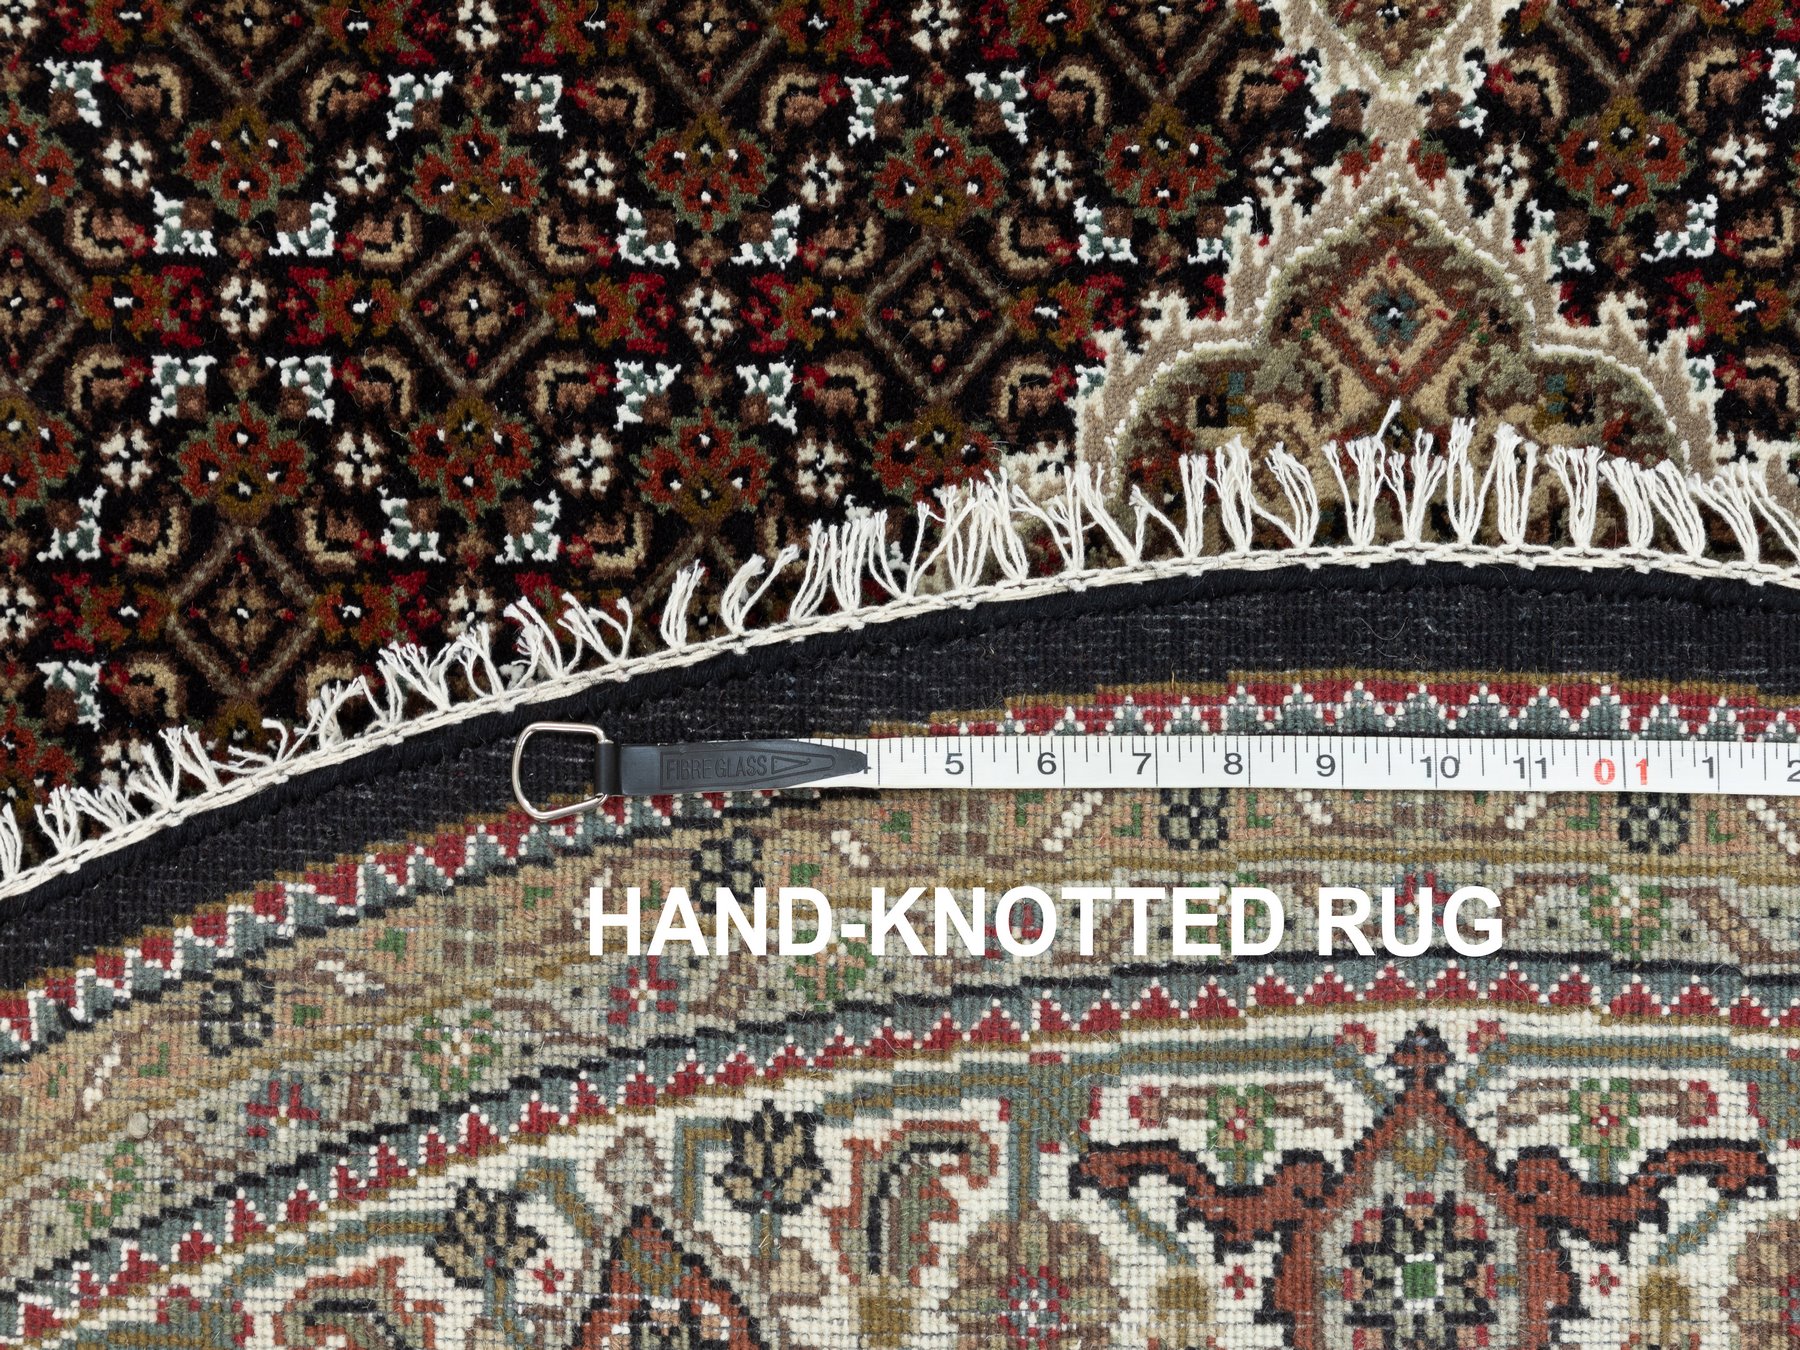 Traditional Rugs LUV528327